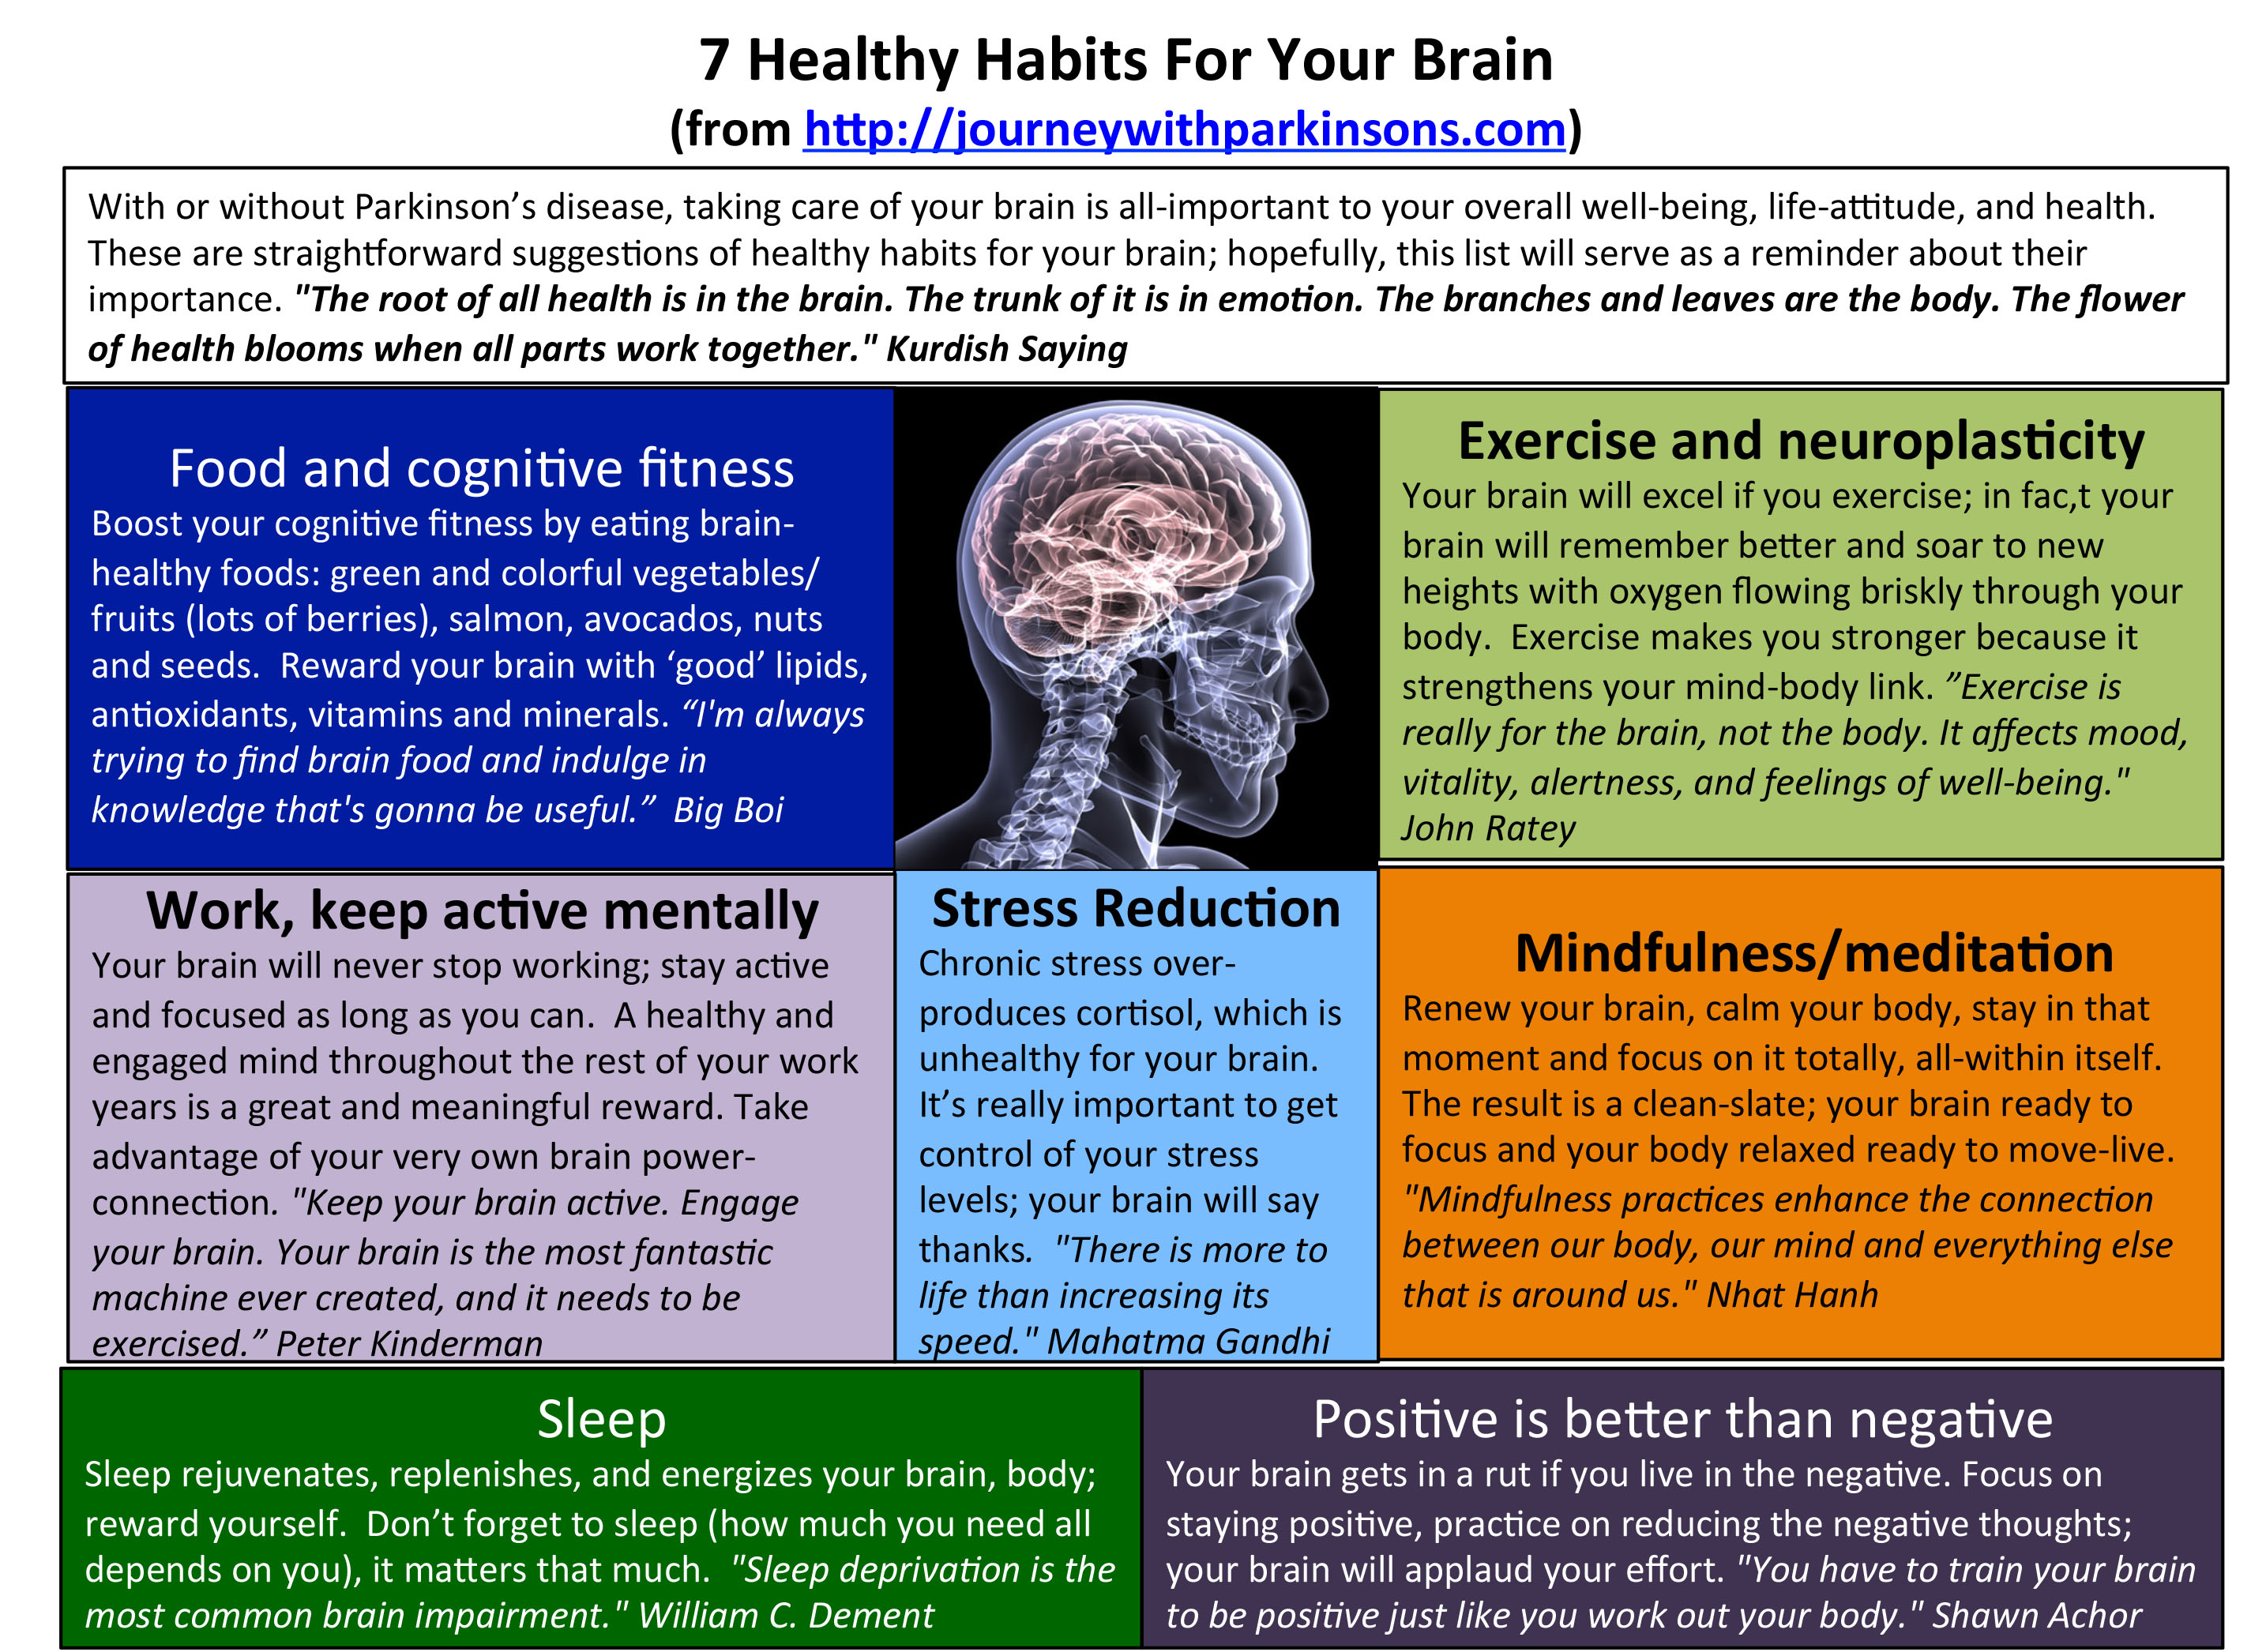 7-healthy-habits-for-your-brain1.jpg